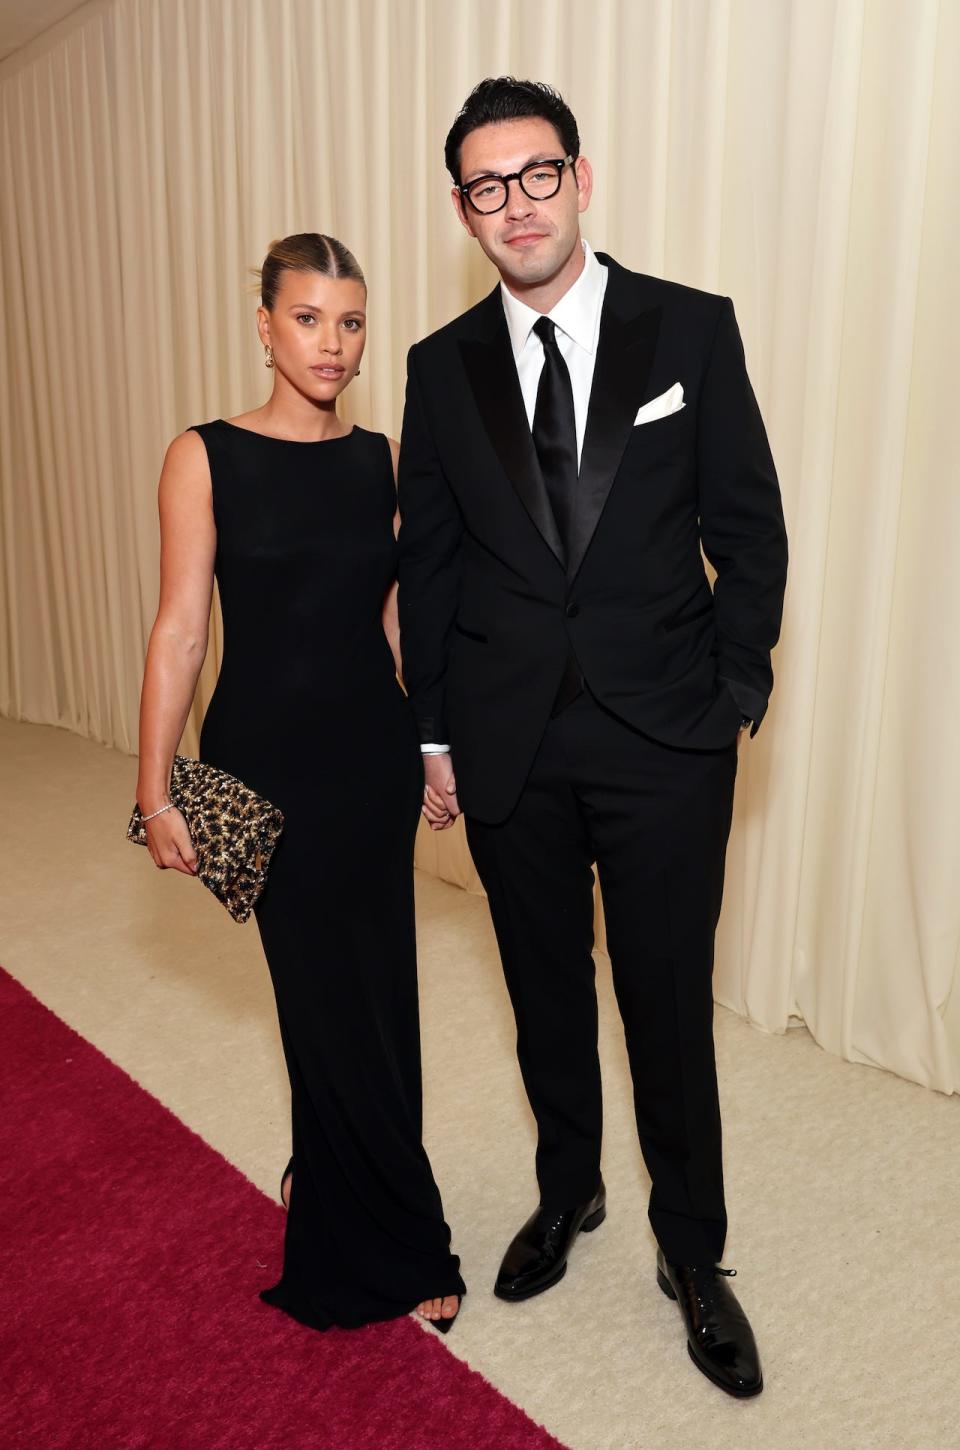 Sofia Richie and Elliot Grainge attend the Elton John AIDS Foundation's 30th Annual Academy Awards Viewing Party in West Hollywood, California, on March 27, 2022.